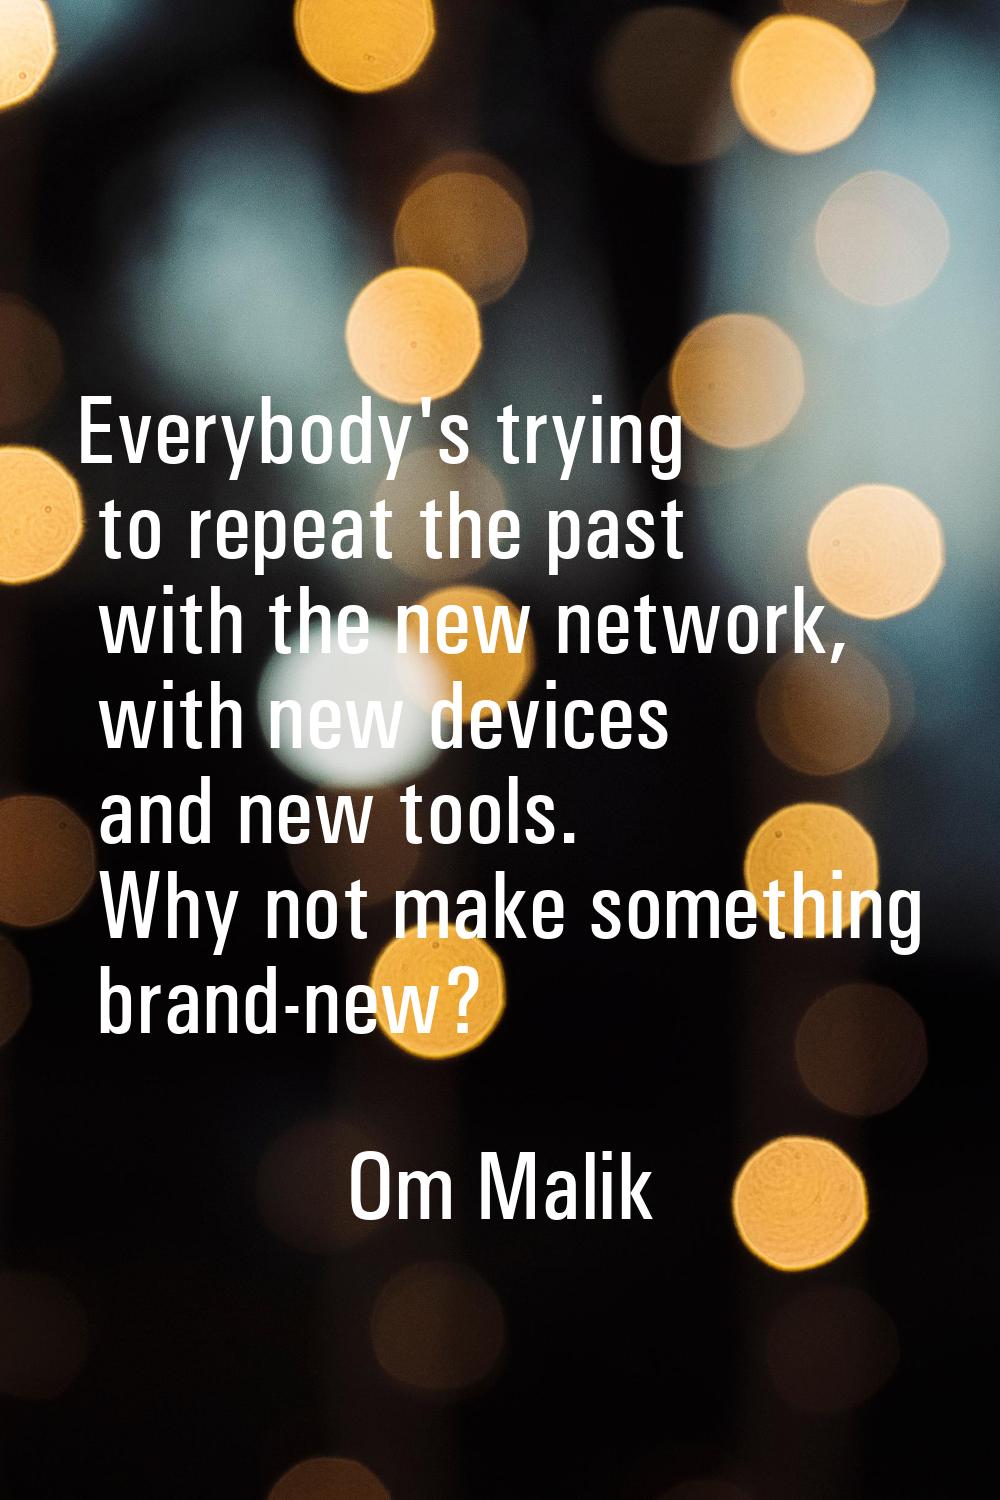 Everybody's trying to repeat the past with the new network, with new devices and new tools. Why not